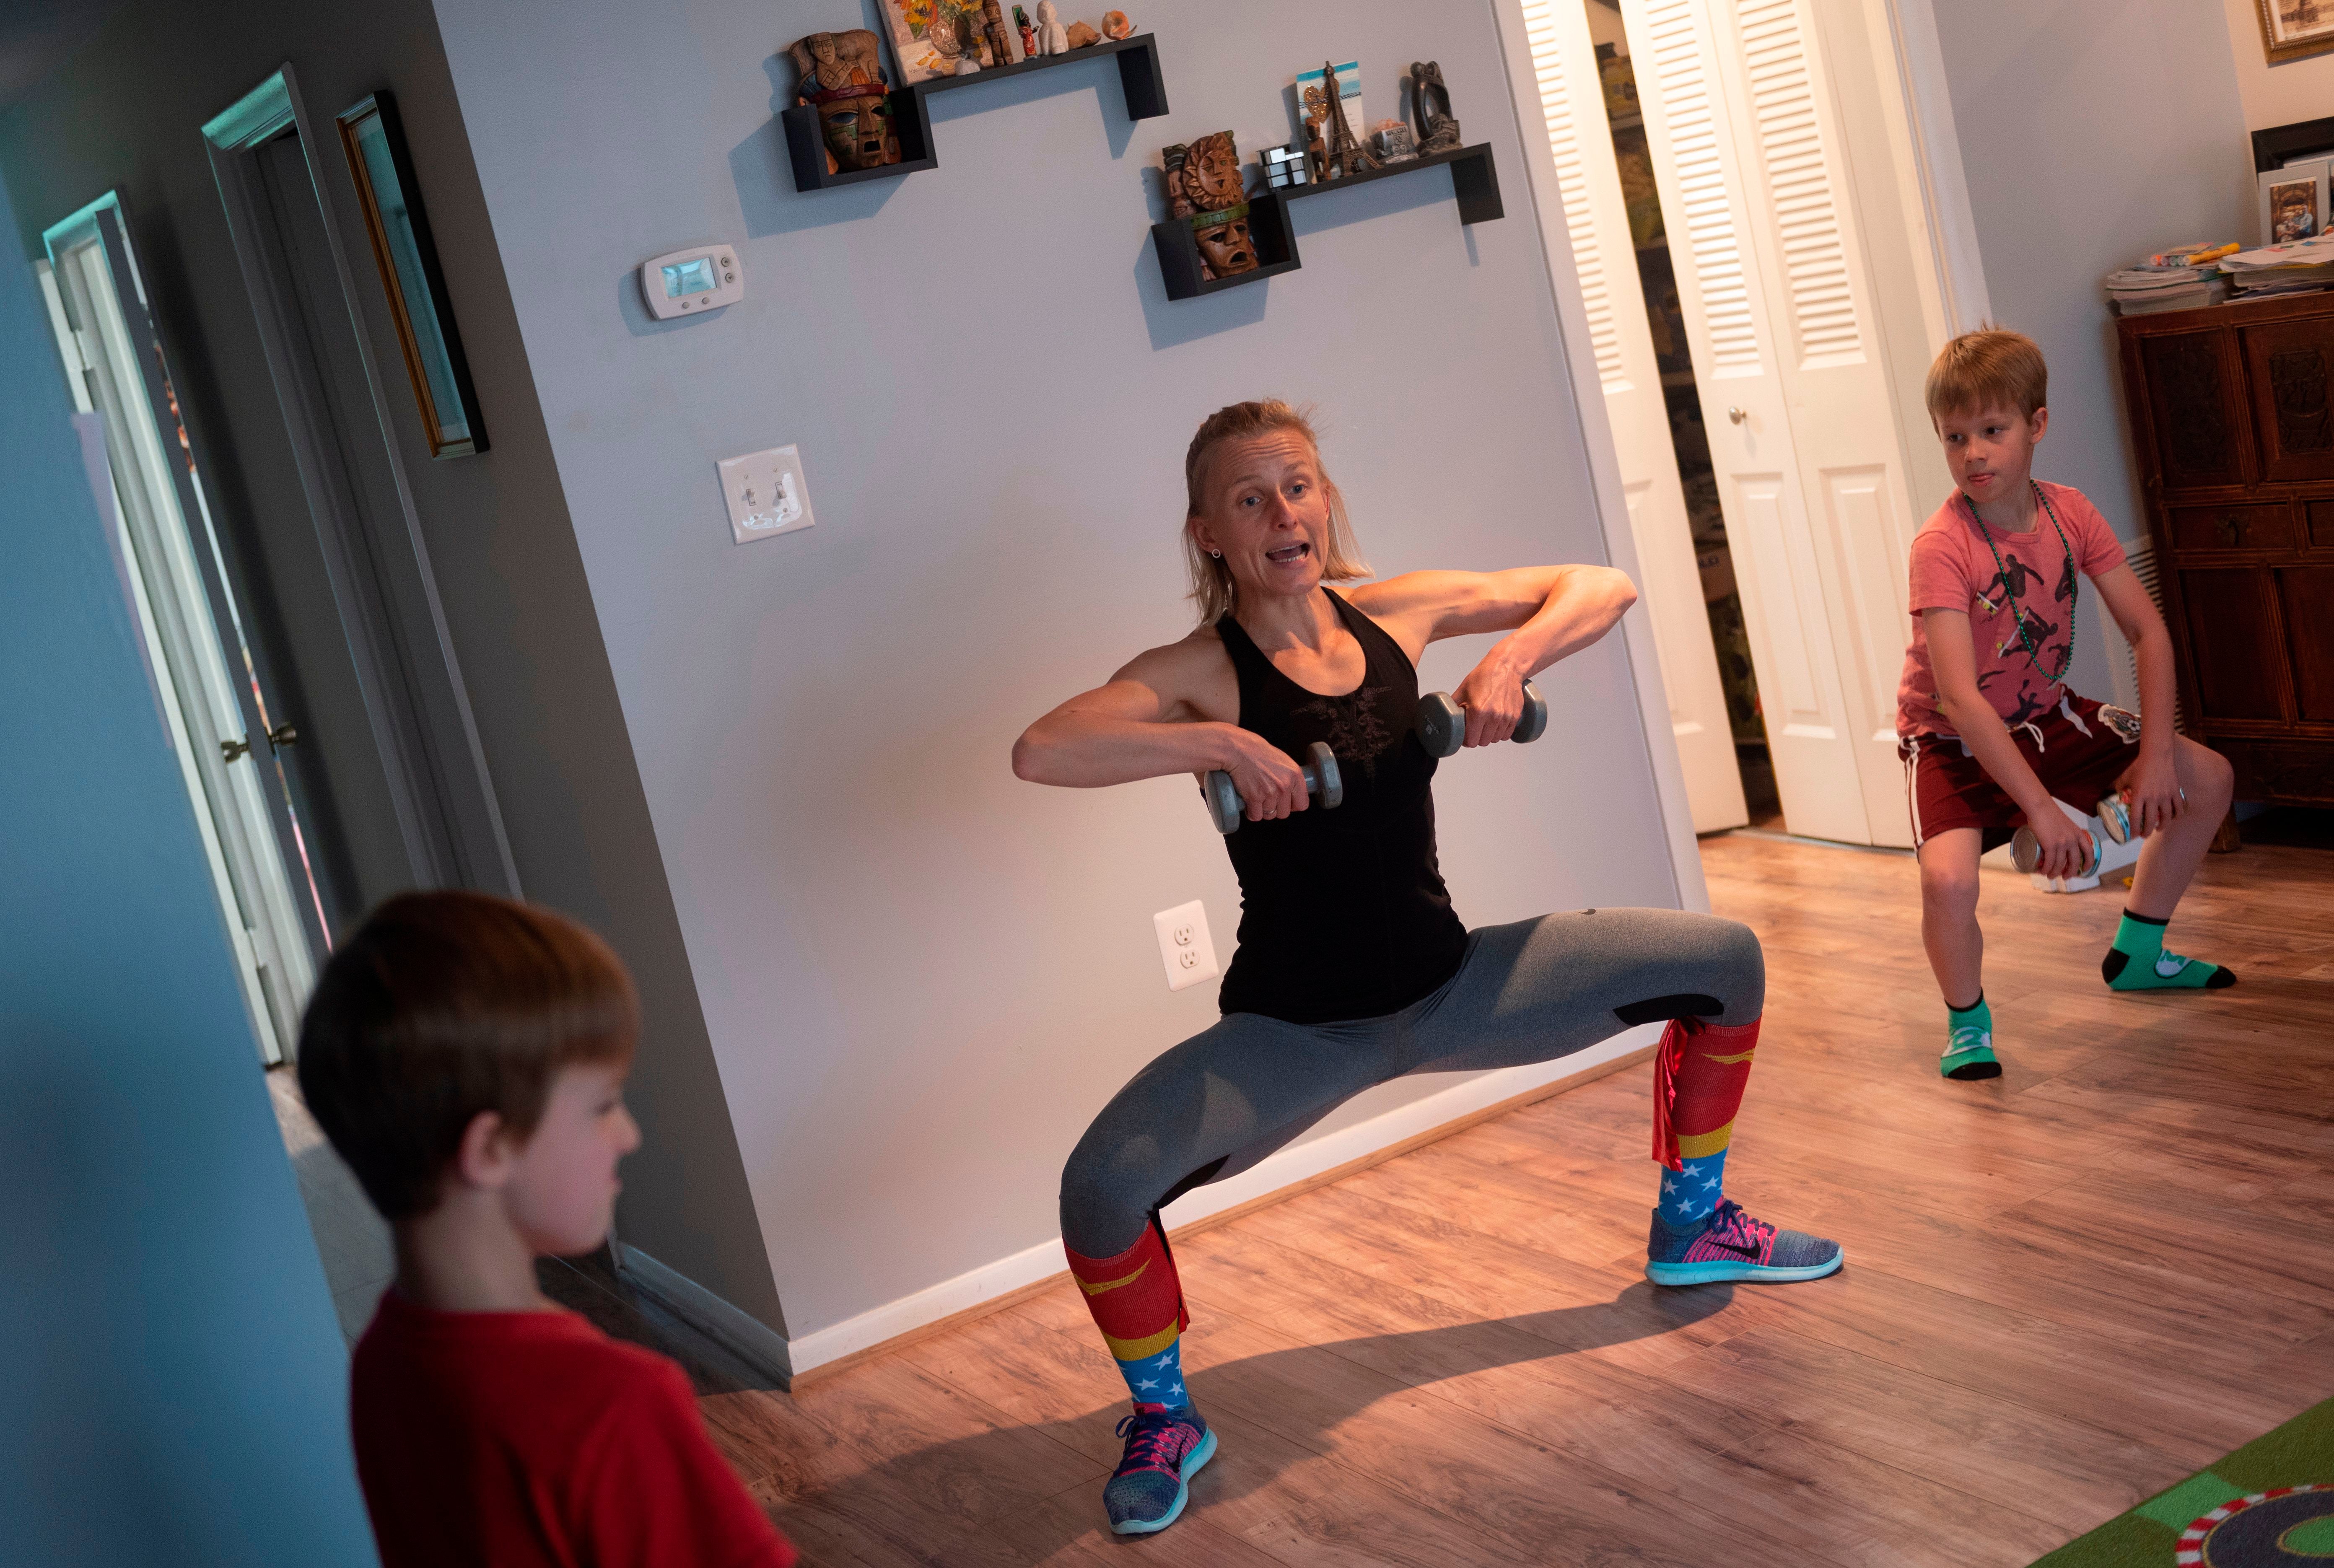 More and more people are embracing home workouts&nbsp;